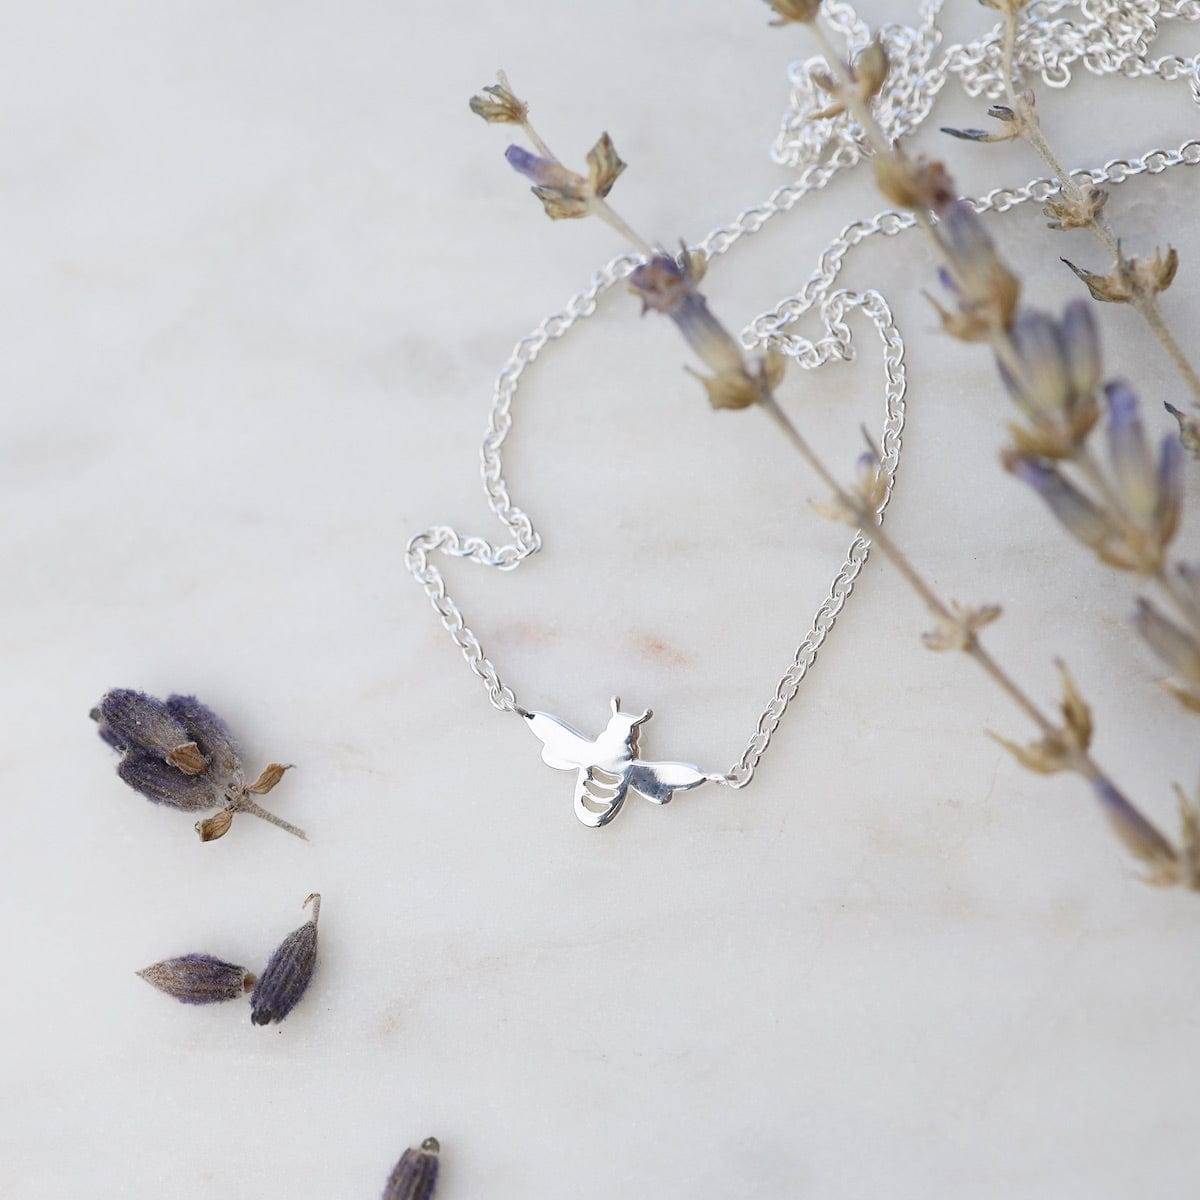 NKL Very Tiny Bee Necklace - Sterling Silver